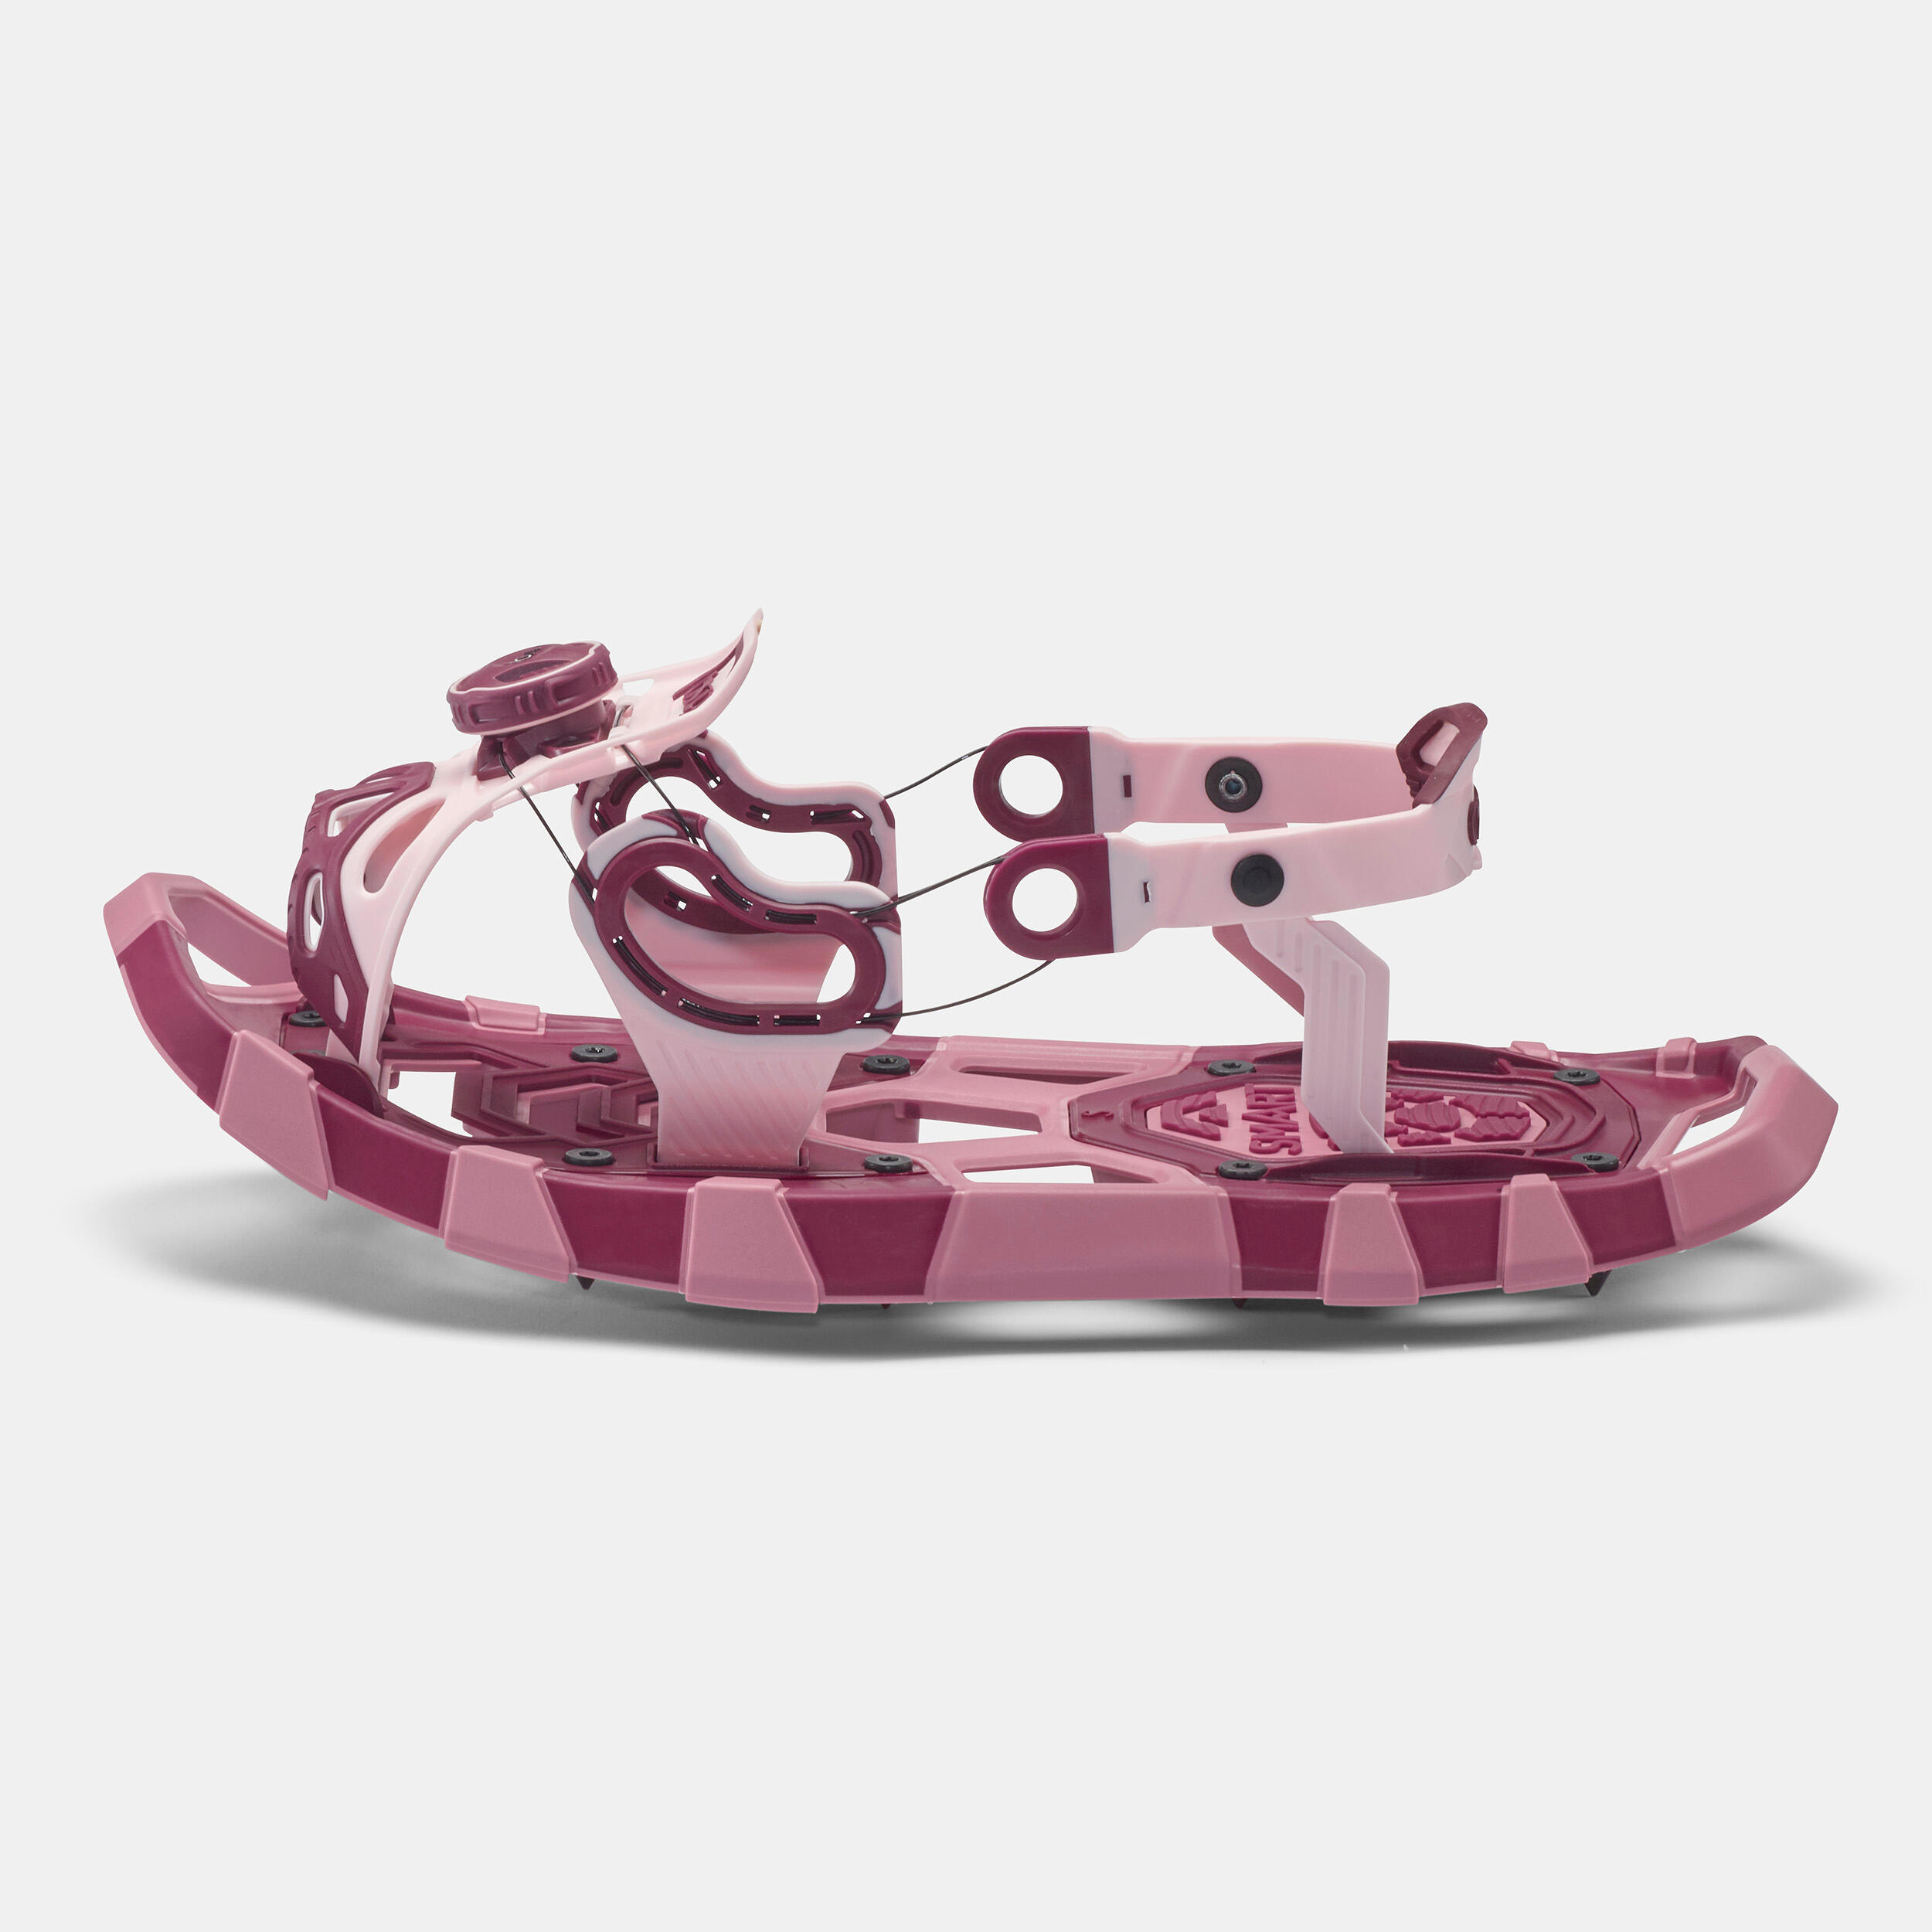 Small Deck Snowshoes - TSL SMART Pink - 5/8